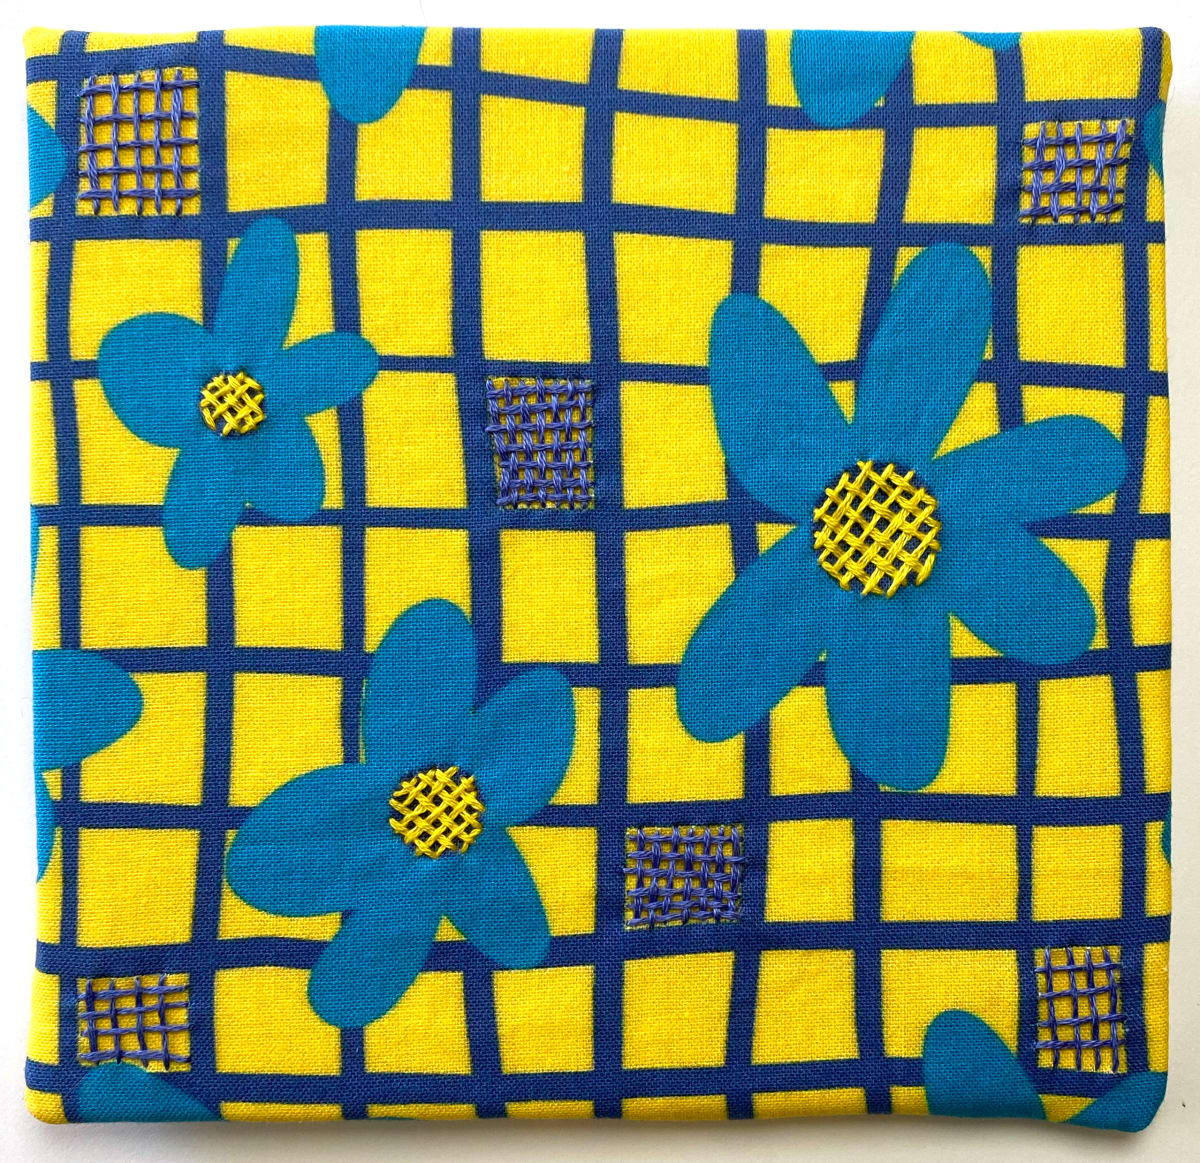 Flower Power - Blue on Yellow by Anne M Bray  Image: Embroidery on a print that I designed.